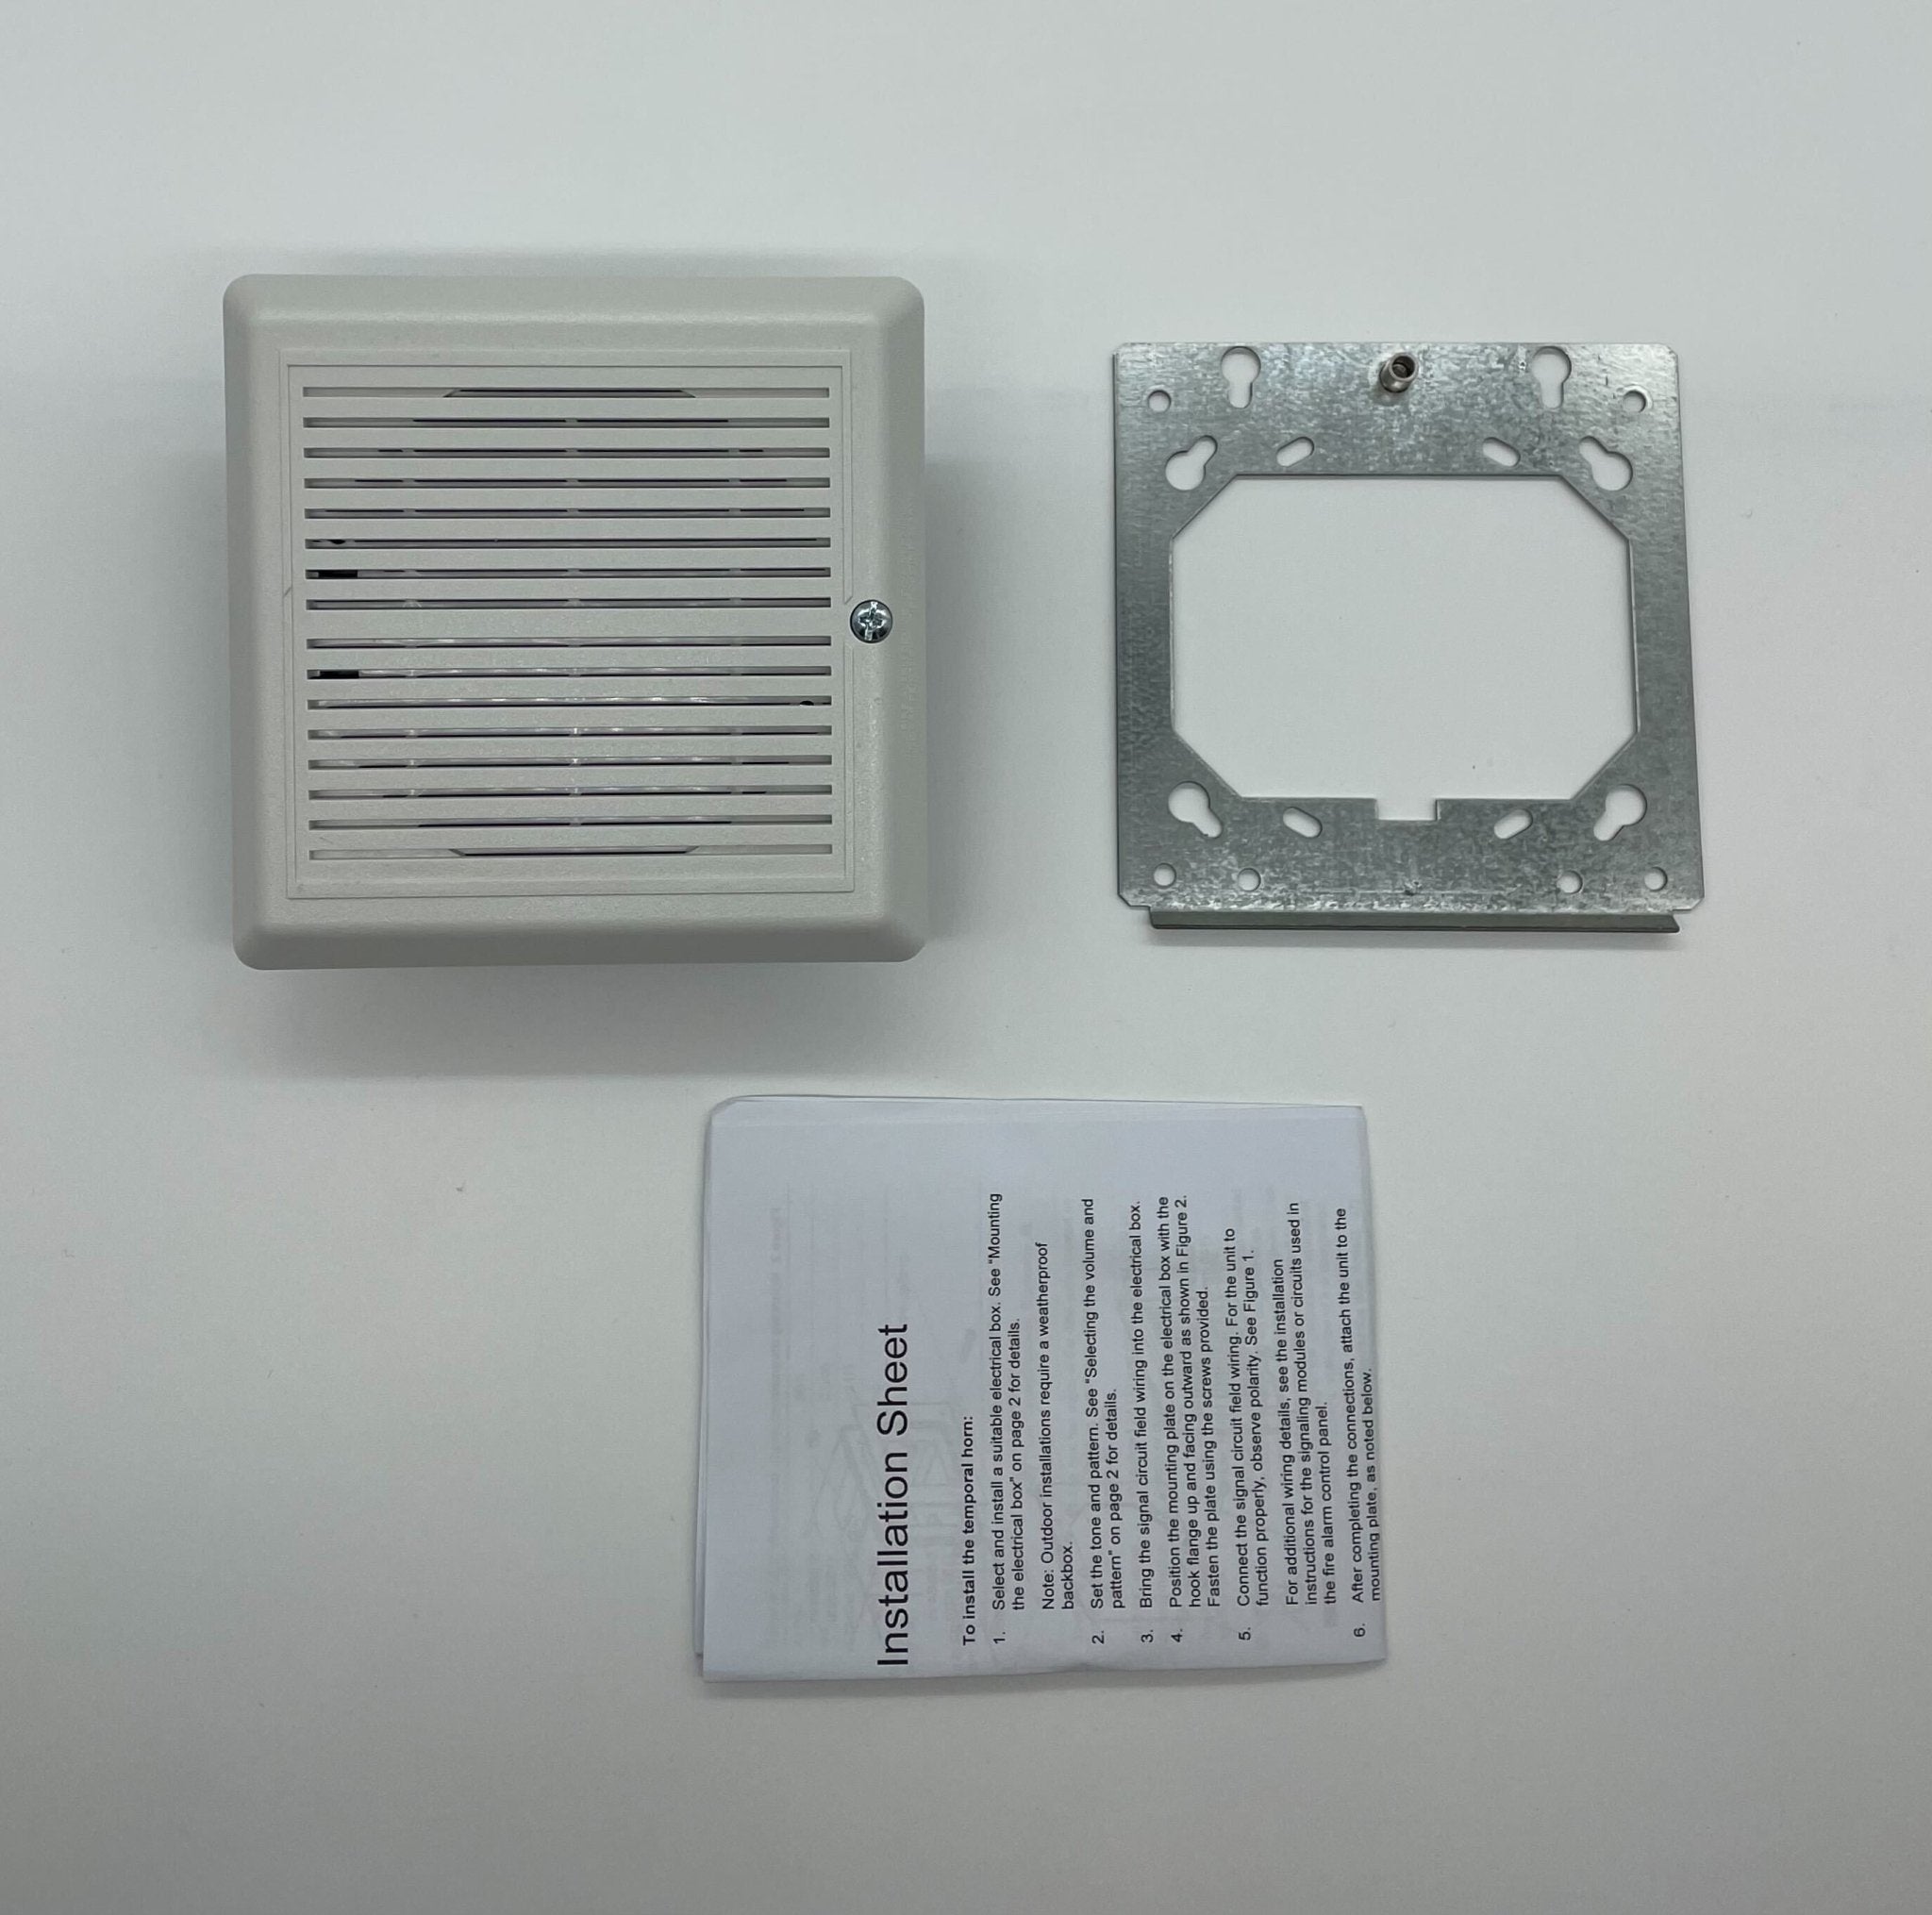 Edwards 757-1A-TW - The Fire Alarm Supplier